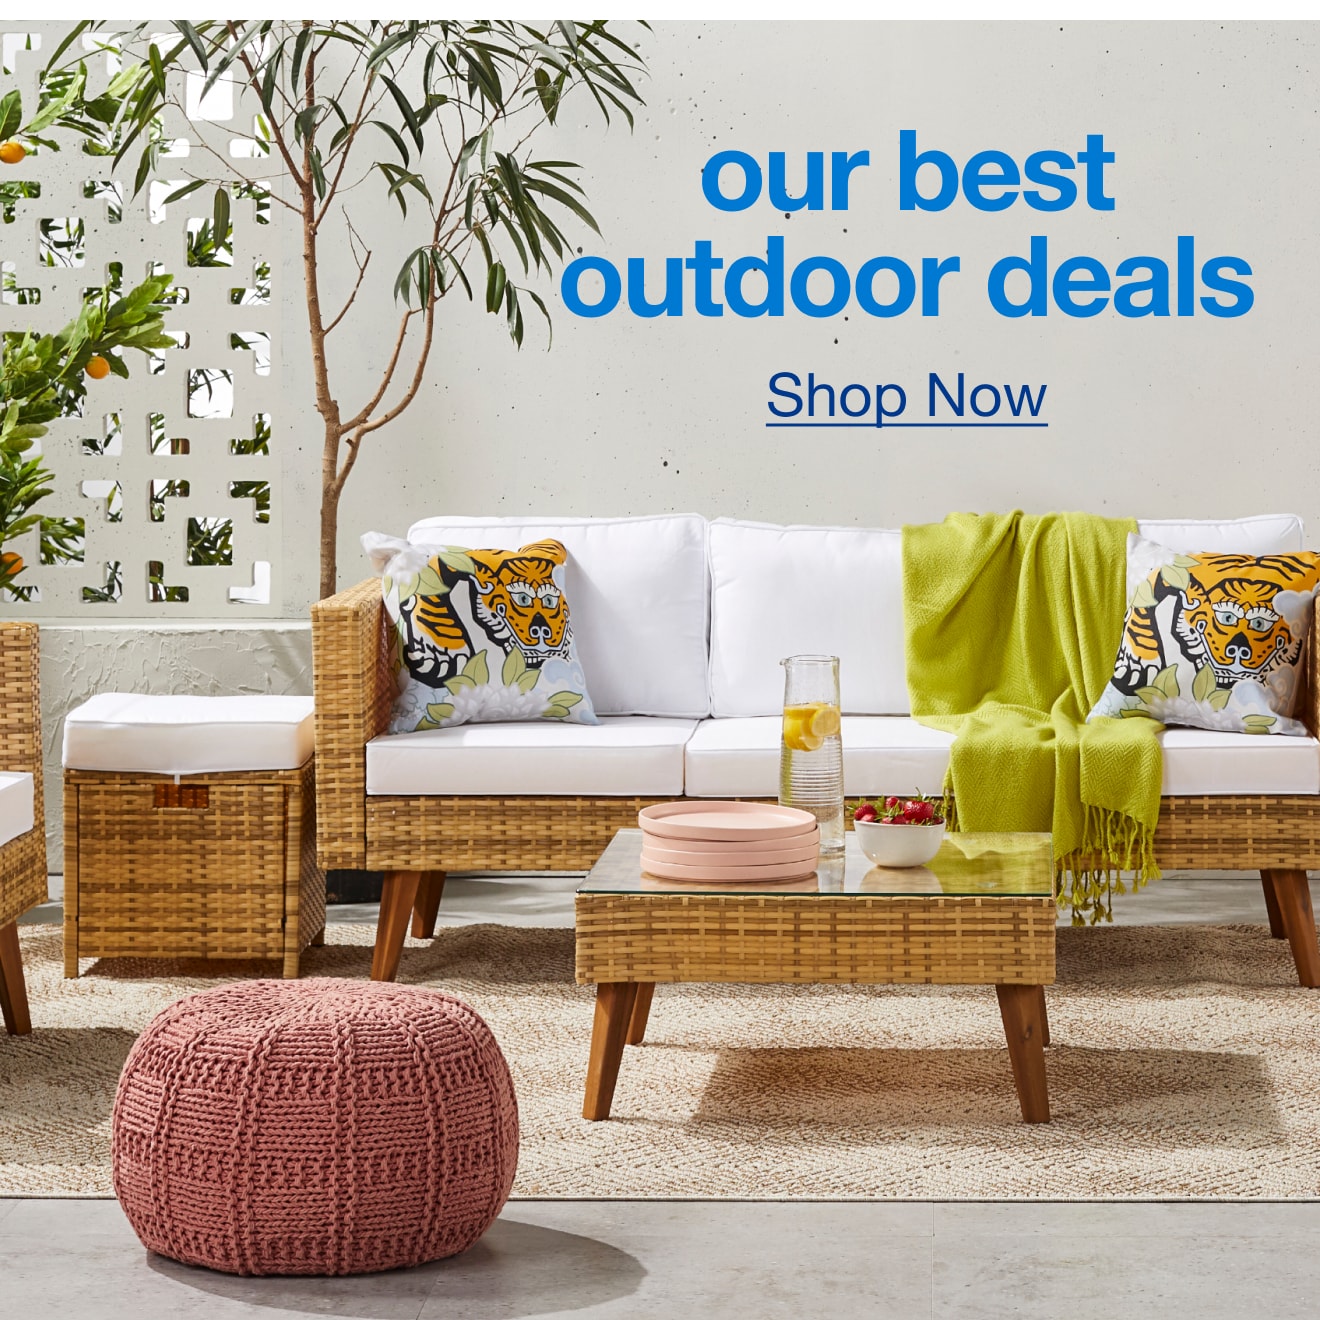 Our Best Outoor Deals - Shop Now!